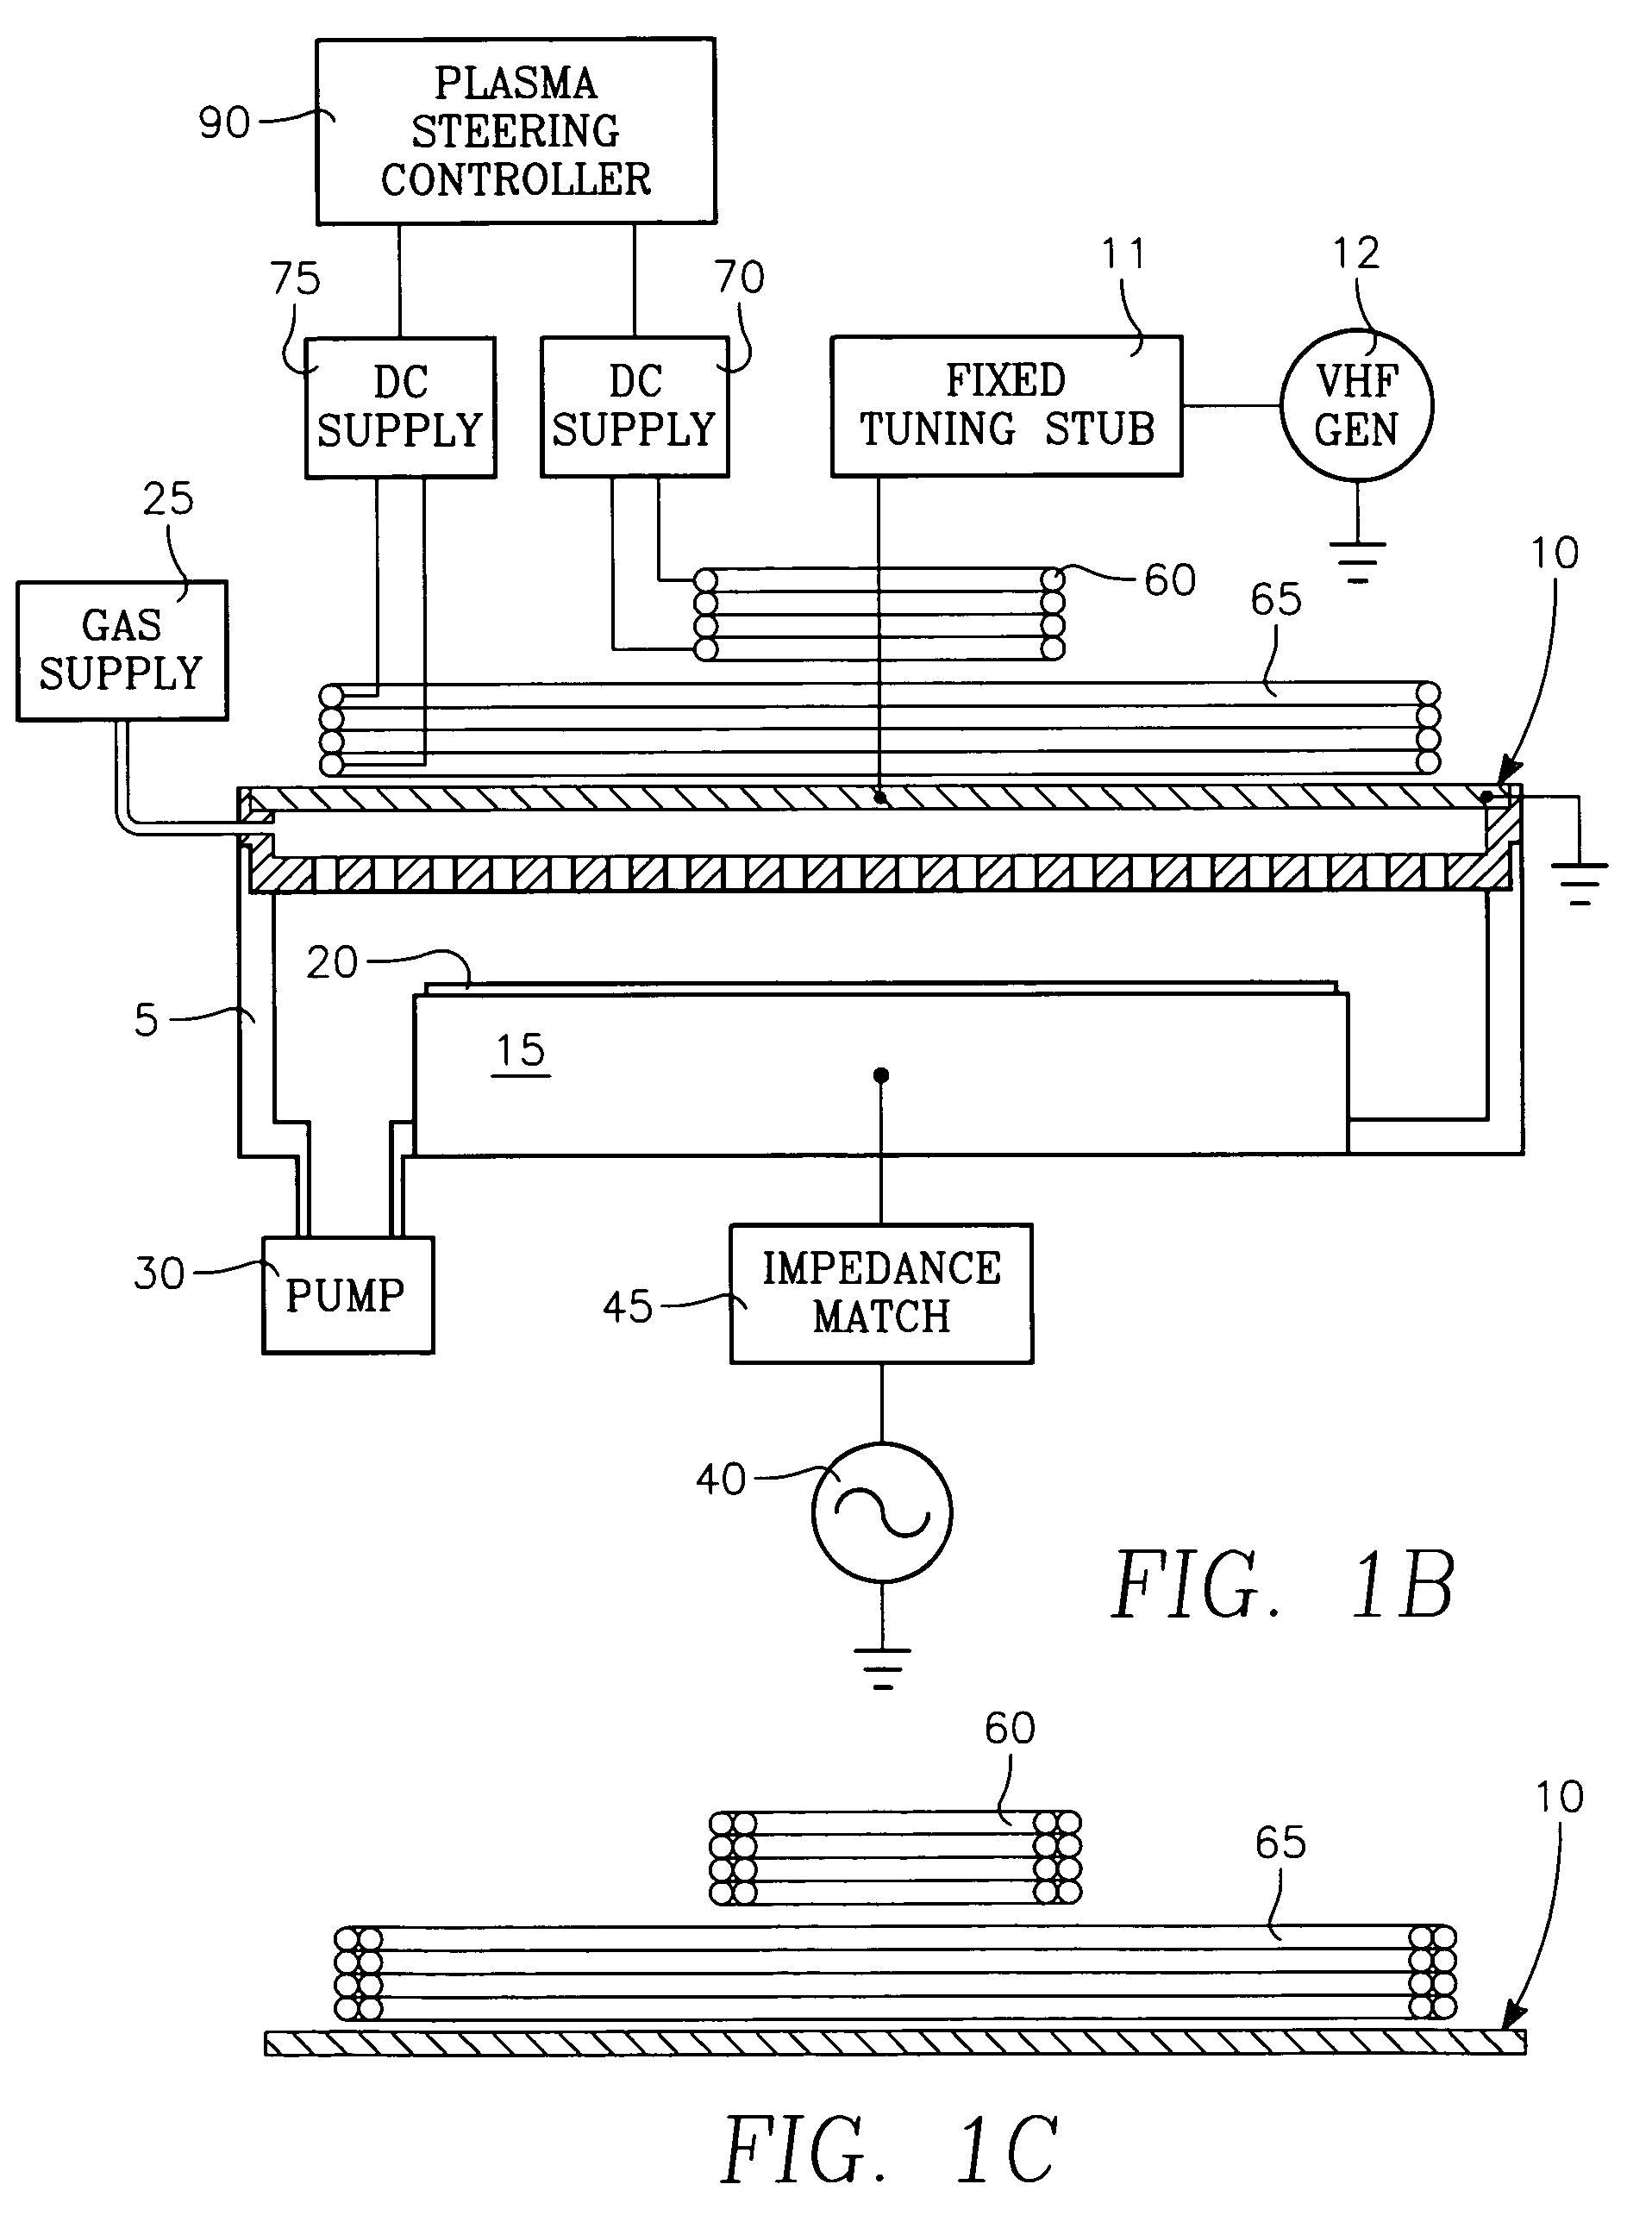 Capacitively coupled plasma reactor with magnetic plasma control